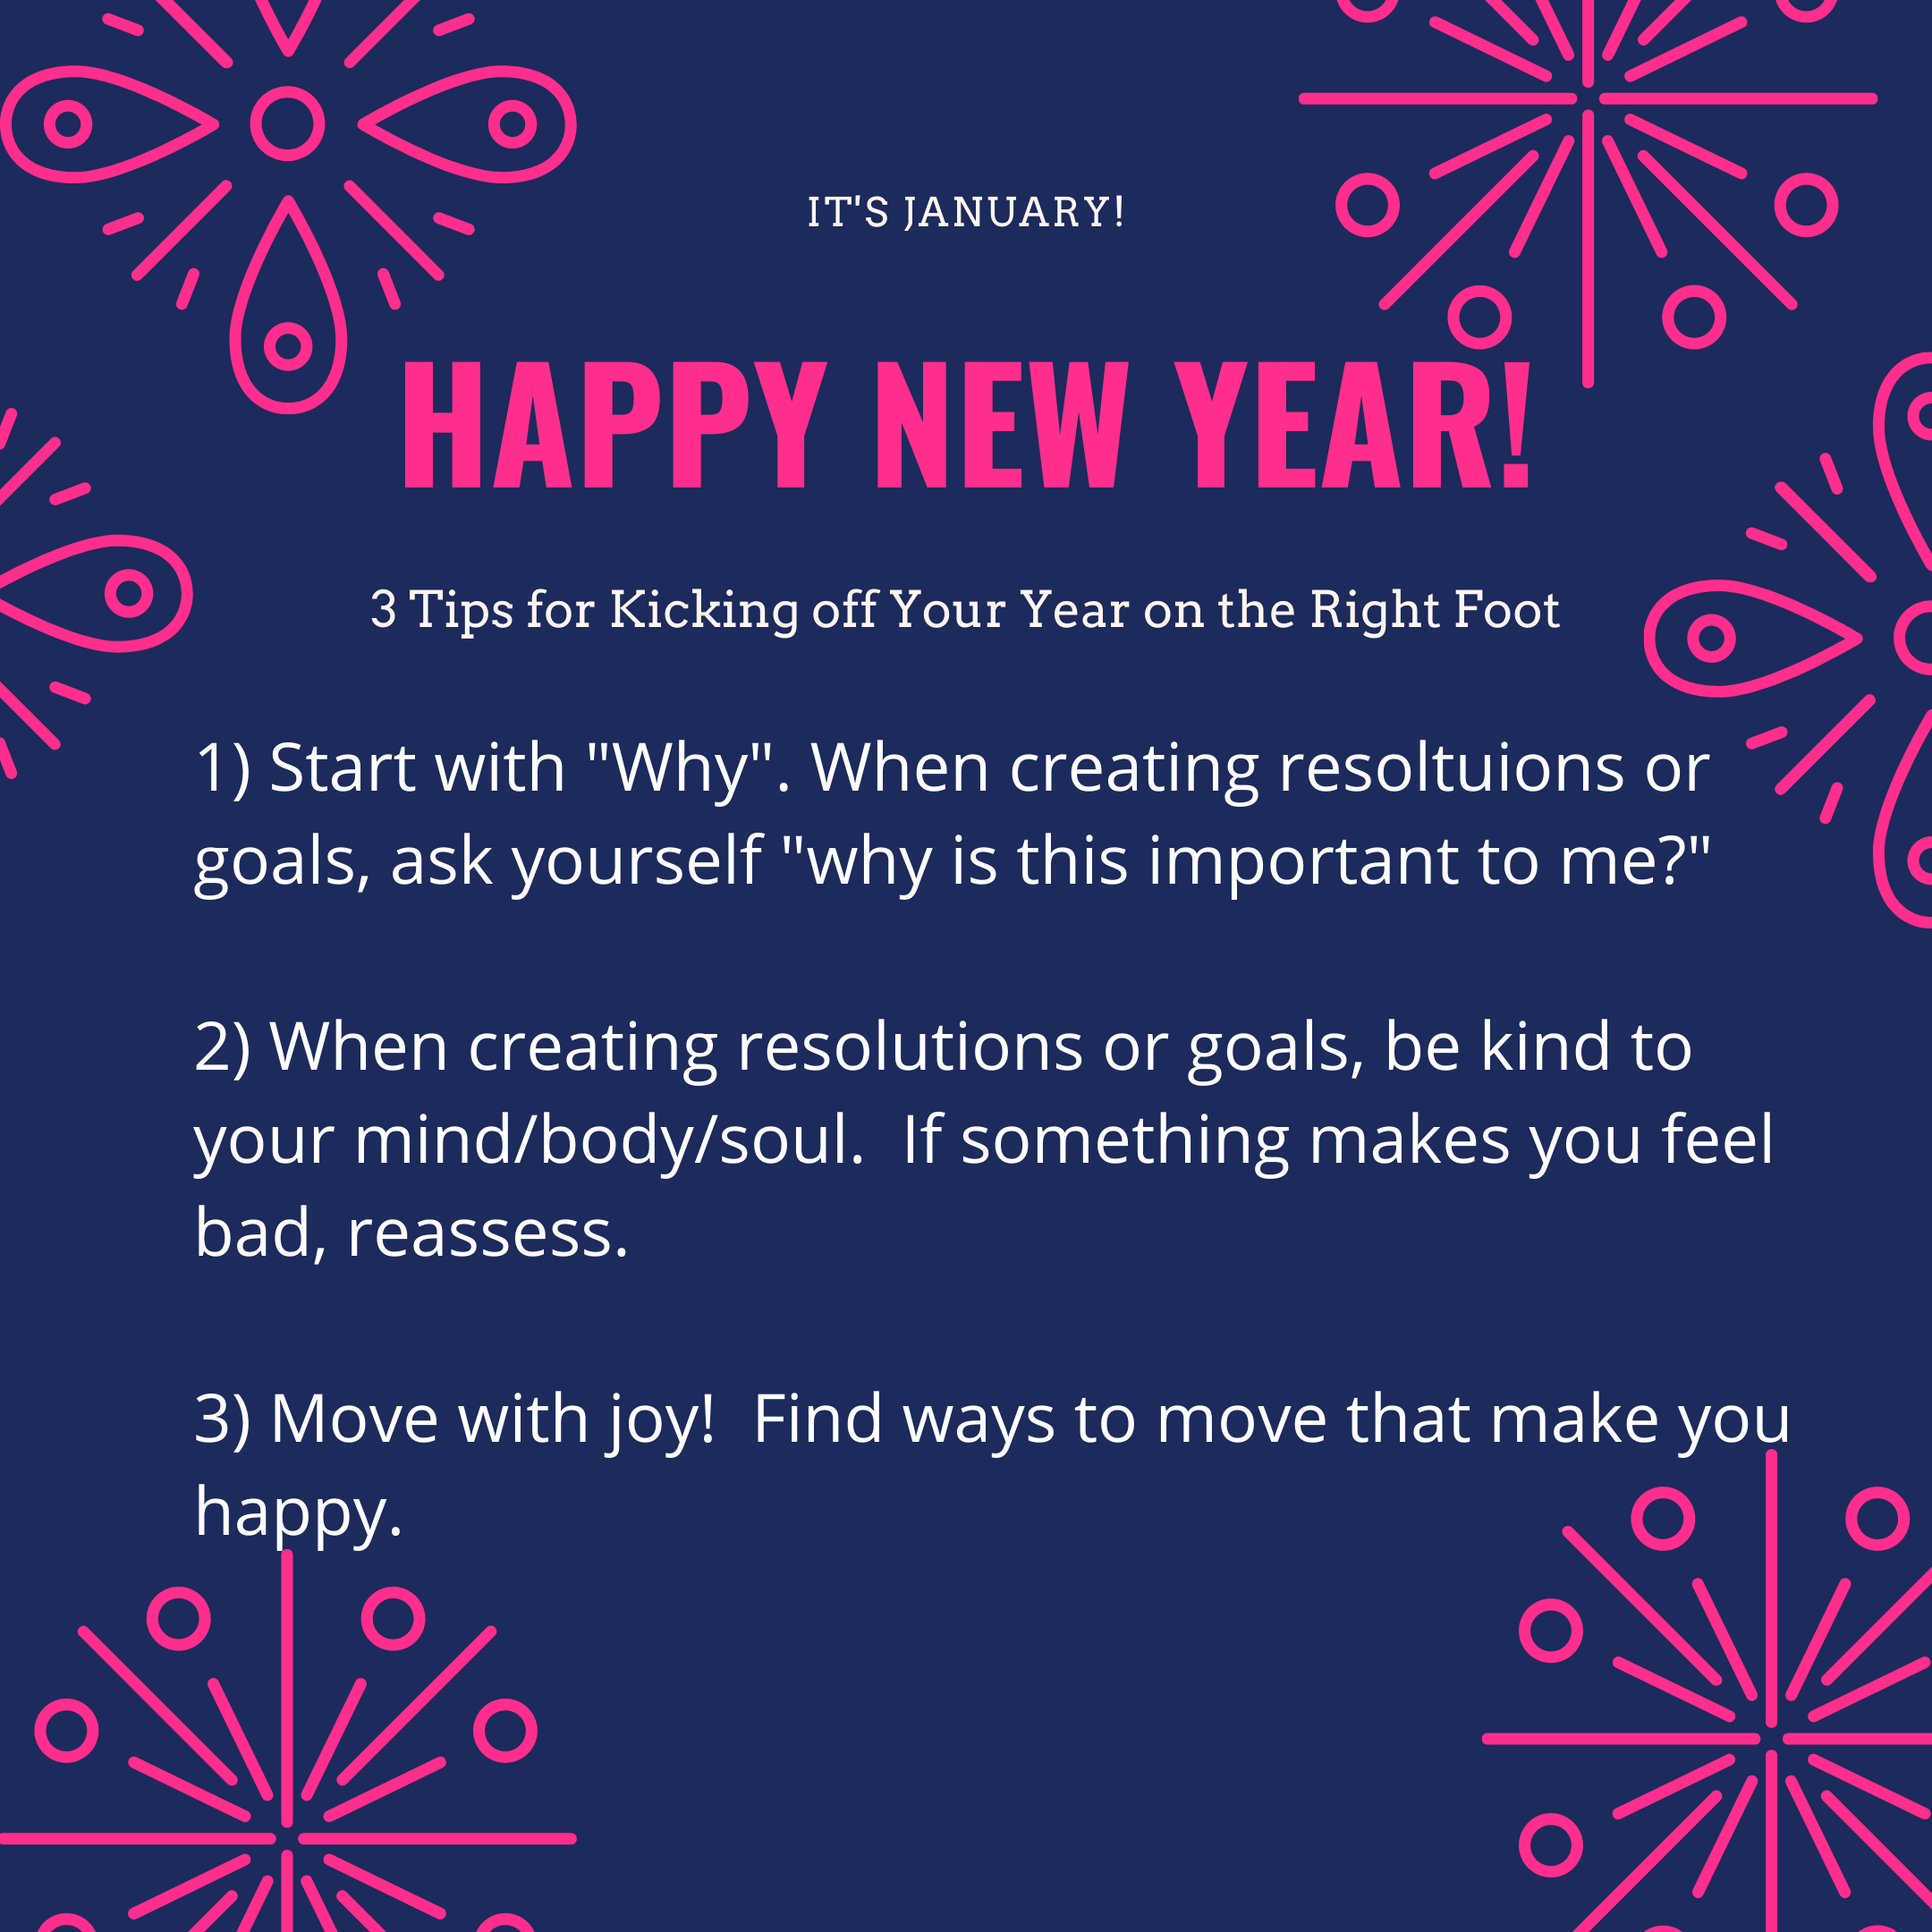 3 Tips for Setting Kind Resolutions